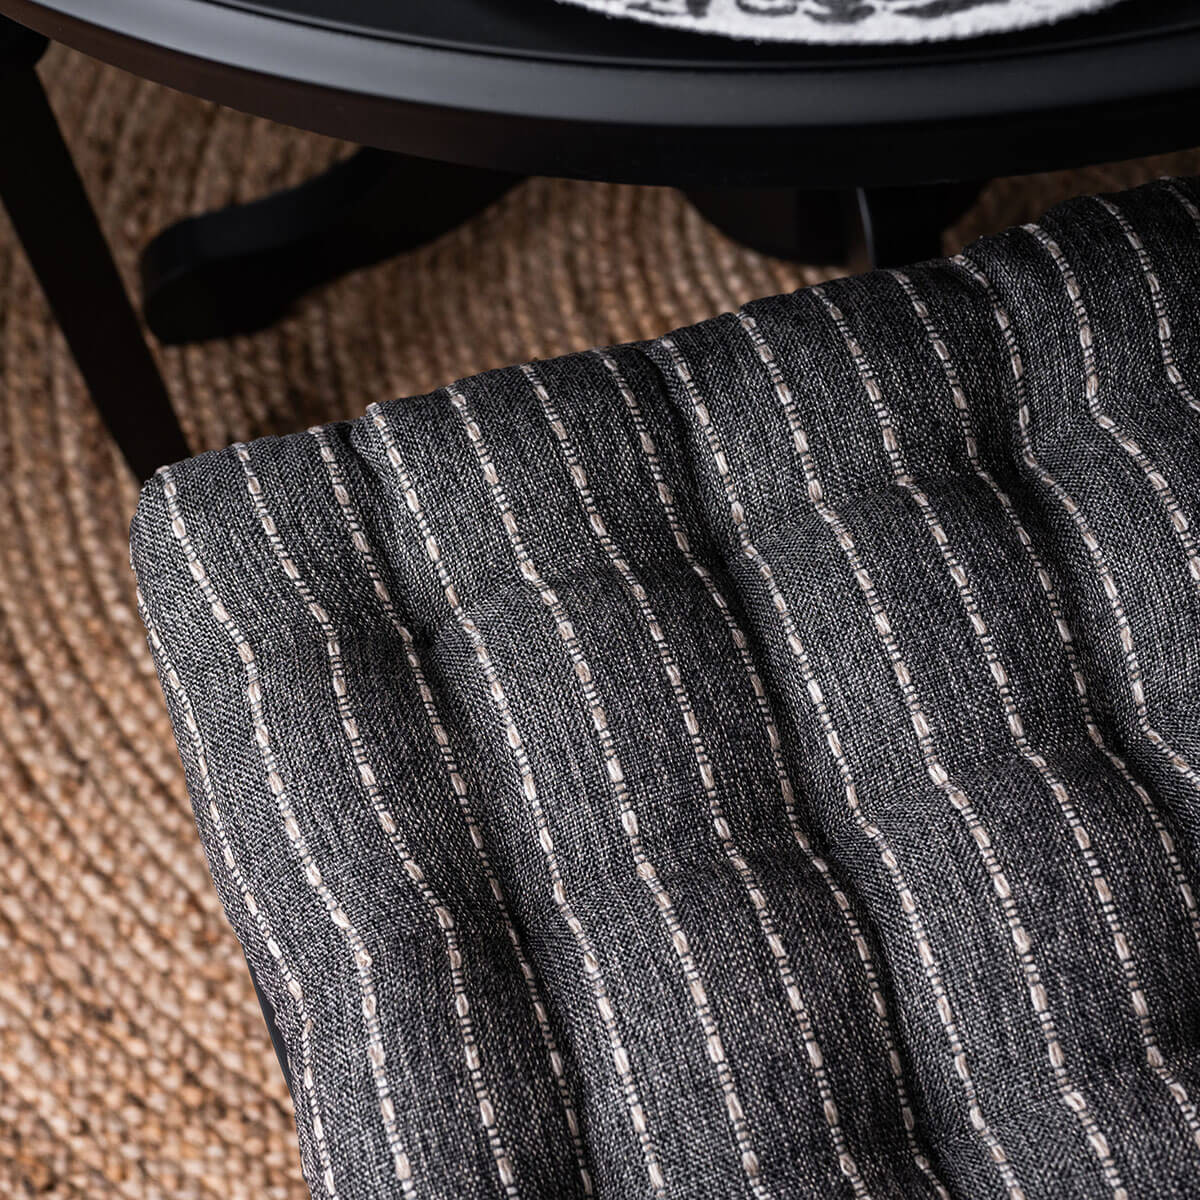 detail view of black striped dining chair cushion with upholstery fabric cover